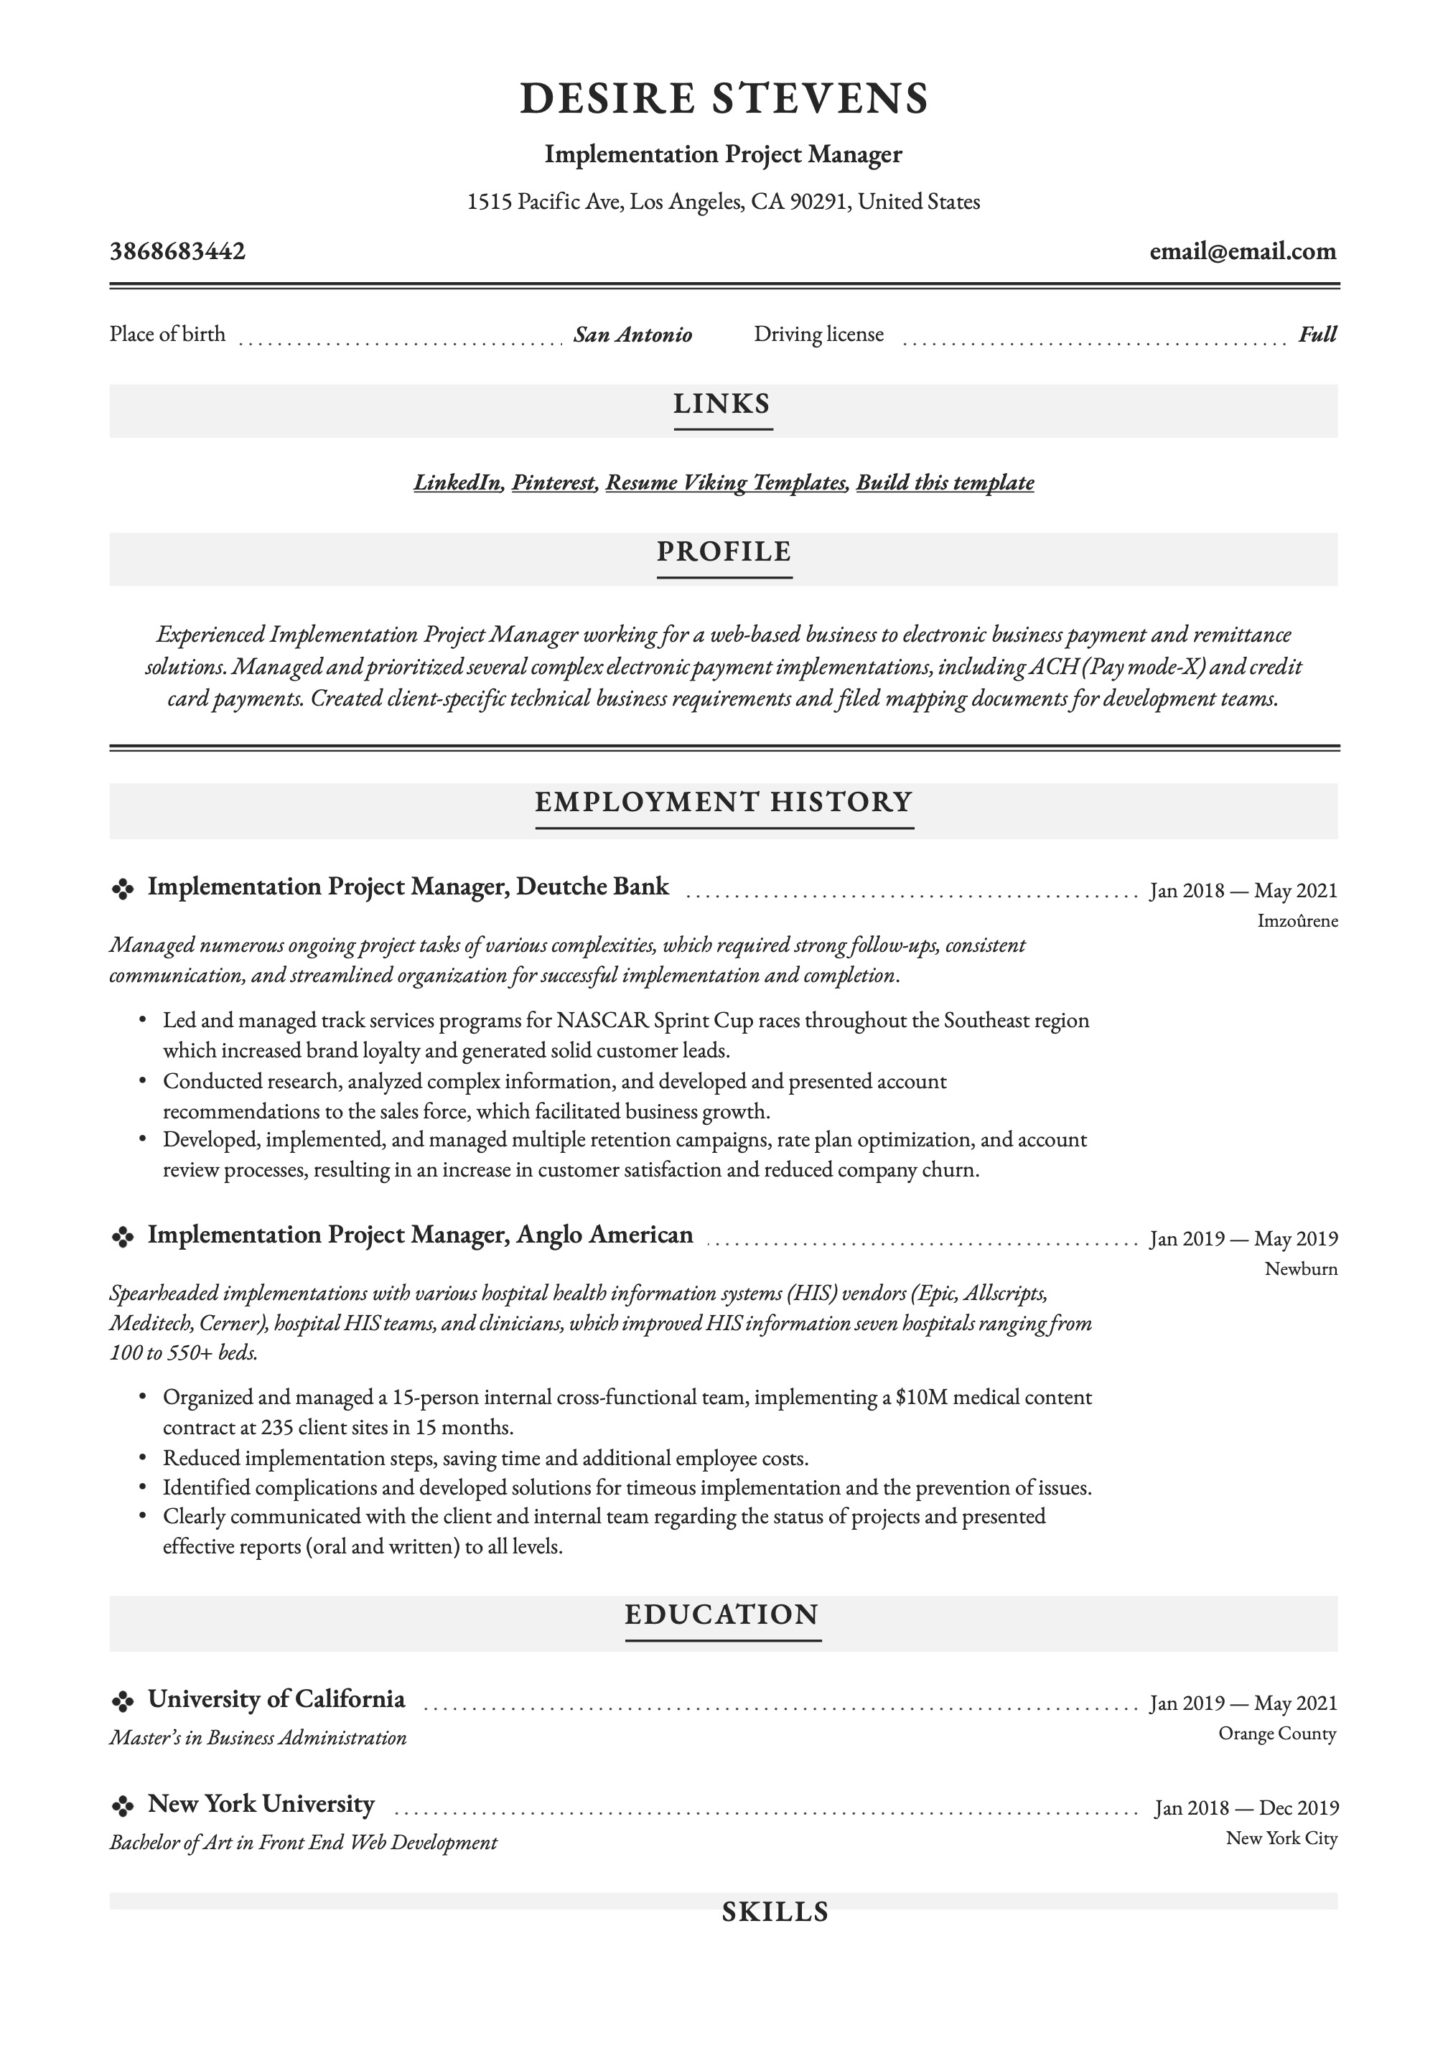 Professional Implementation Project Manager Resume Example